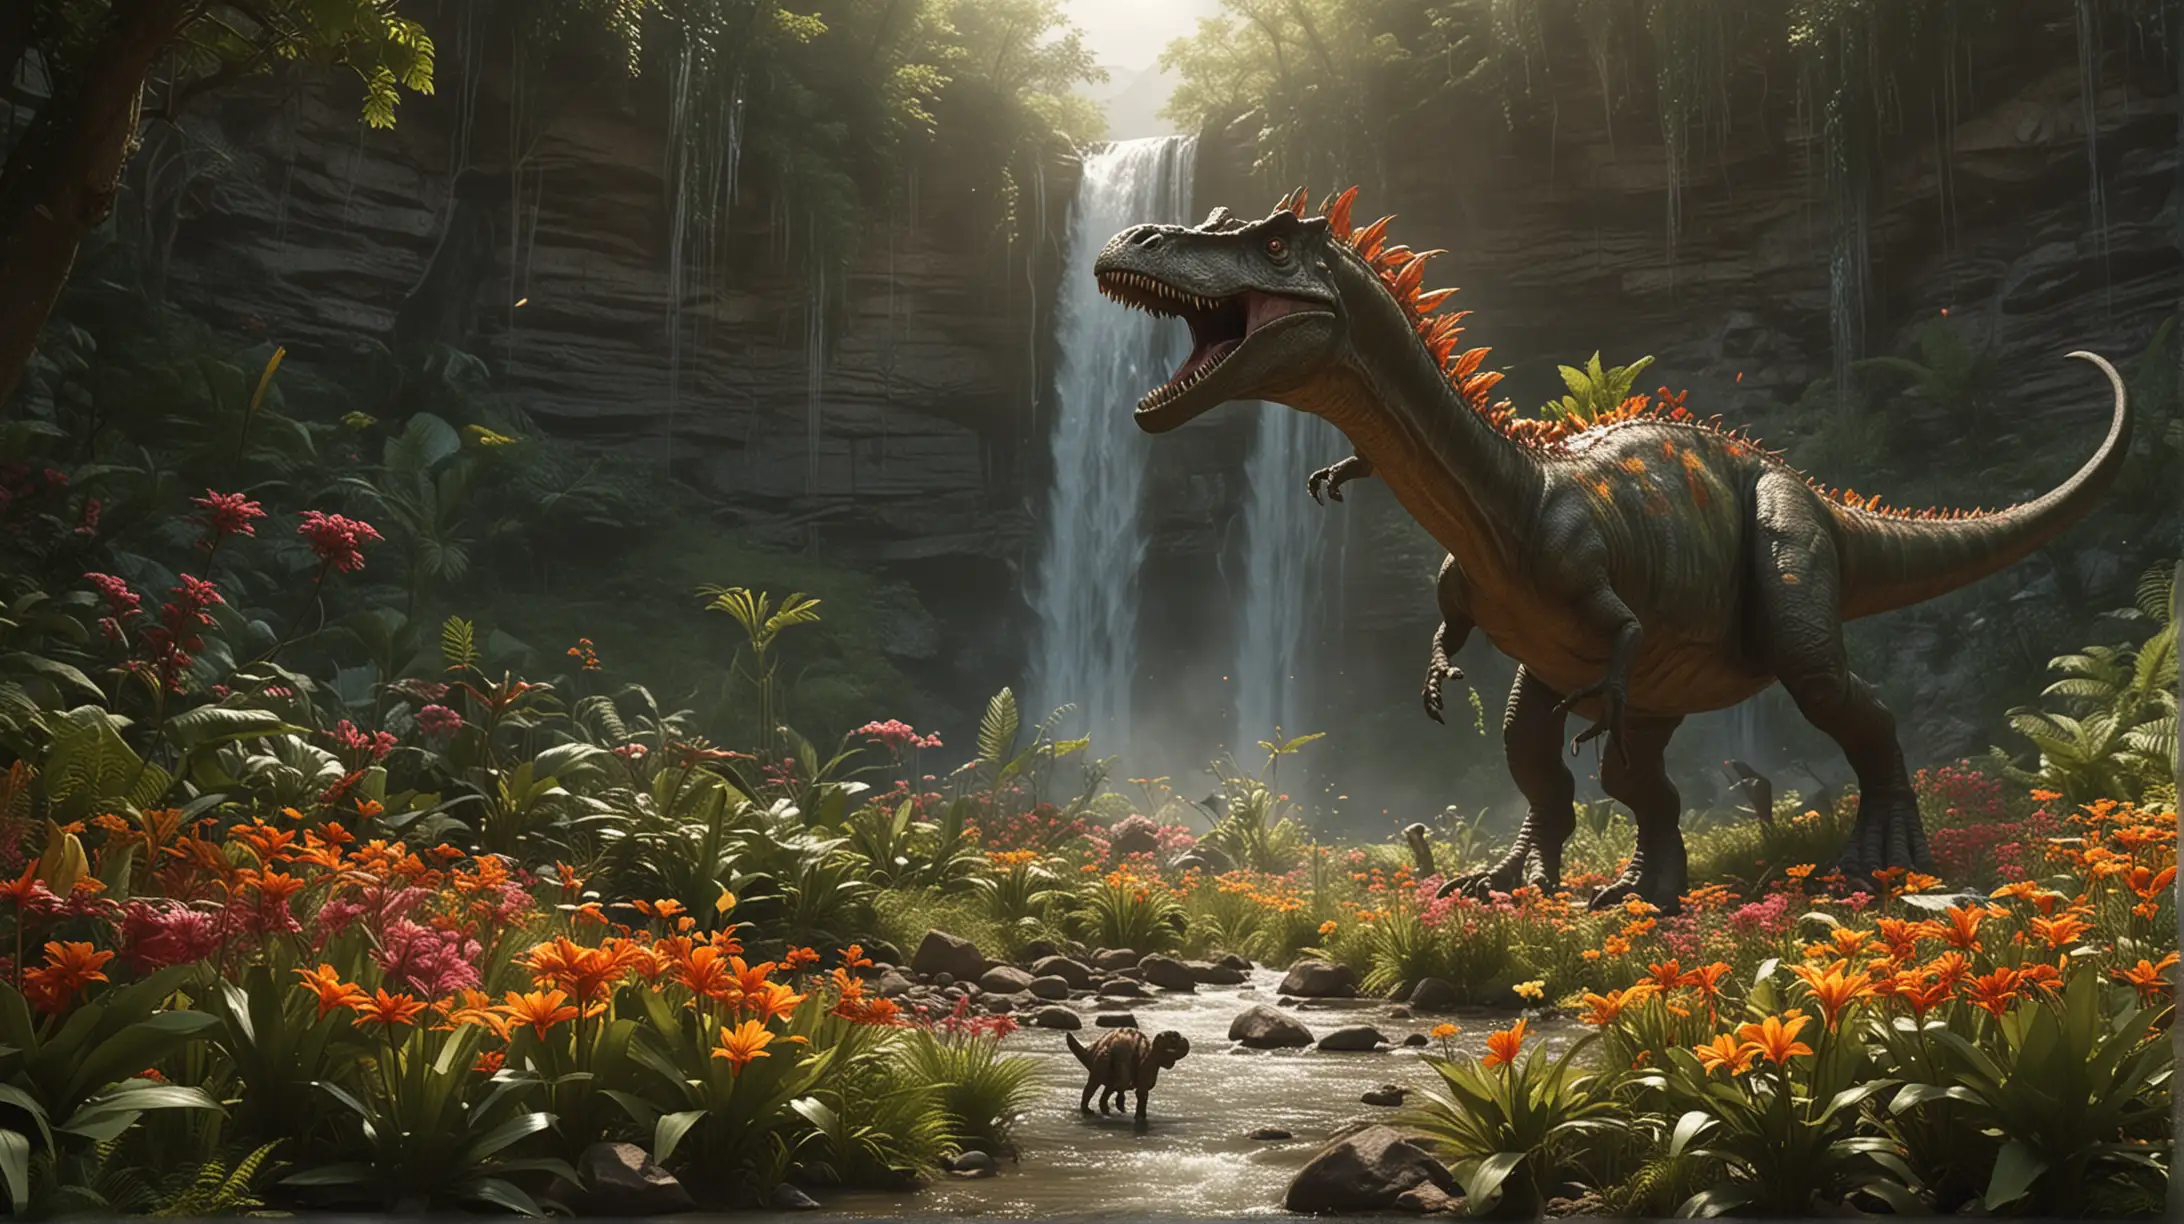 they arrived at a waterfall, a dozen men, behind which lay a lush valley filled with sunlight and strange, glowing flowers. However, their joy was short-lived as a massive dinosaur emerged from the shadows.